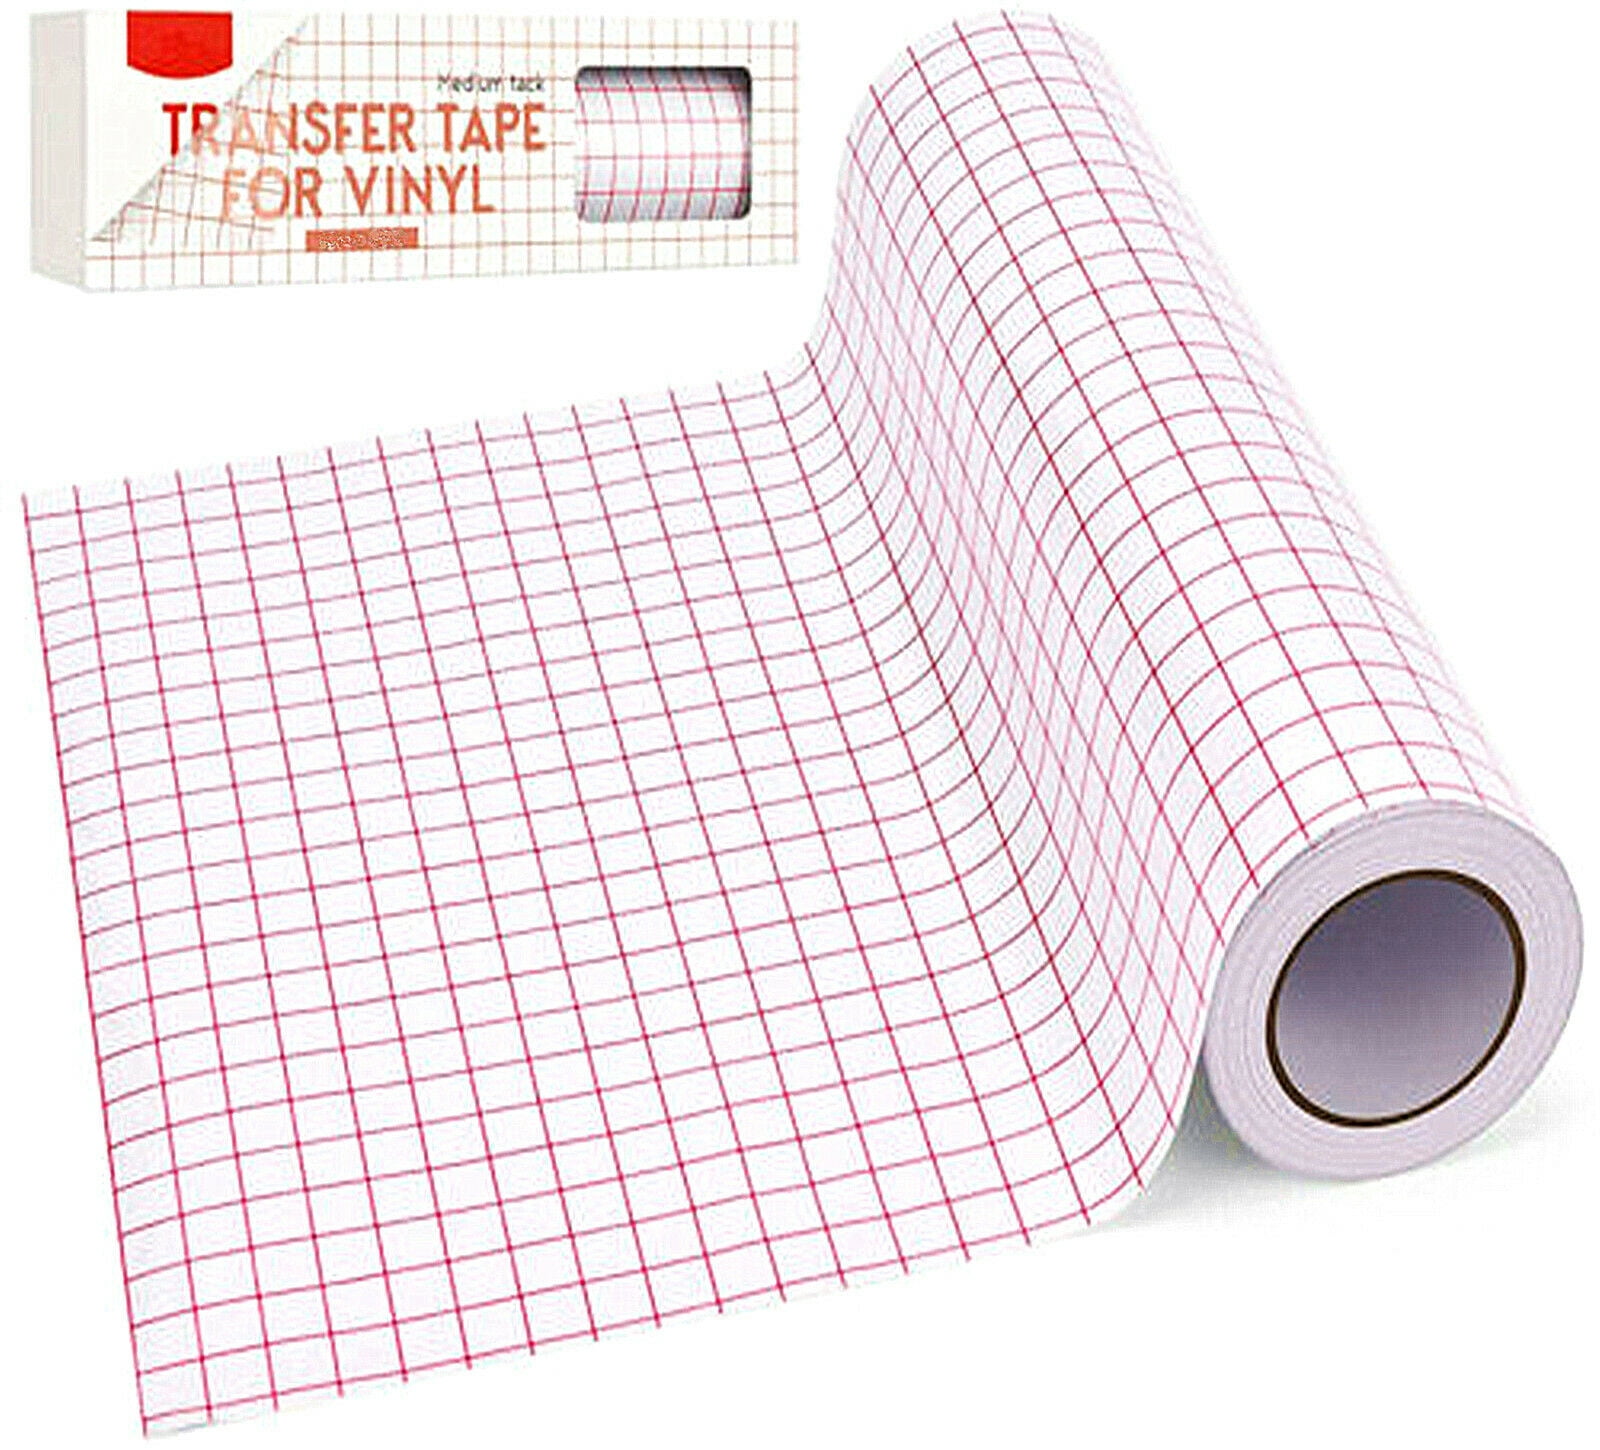 HTVRONT Transfer Tape for Vinyl - 12 X 120 ft w/Red Alignment Grid  Transfer Paper for Cricut Adhesive Vinyl, Silhouette Cameo Vinyl Transfer  Tape for